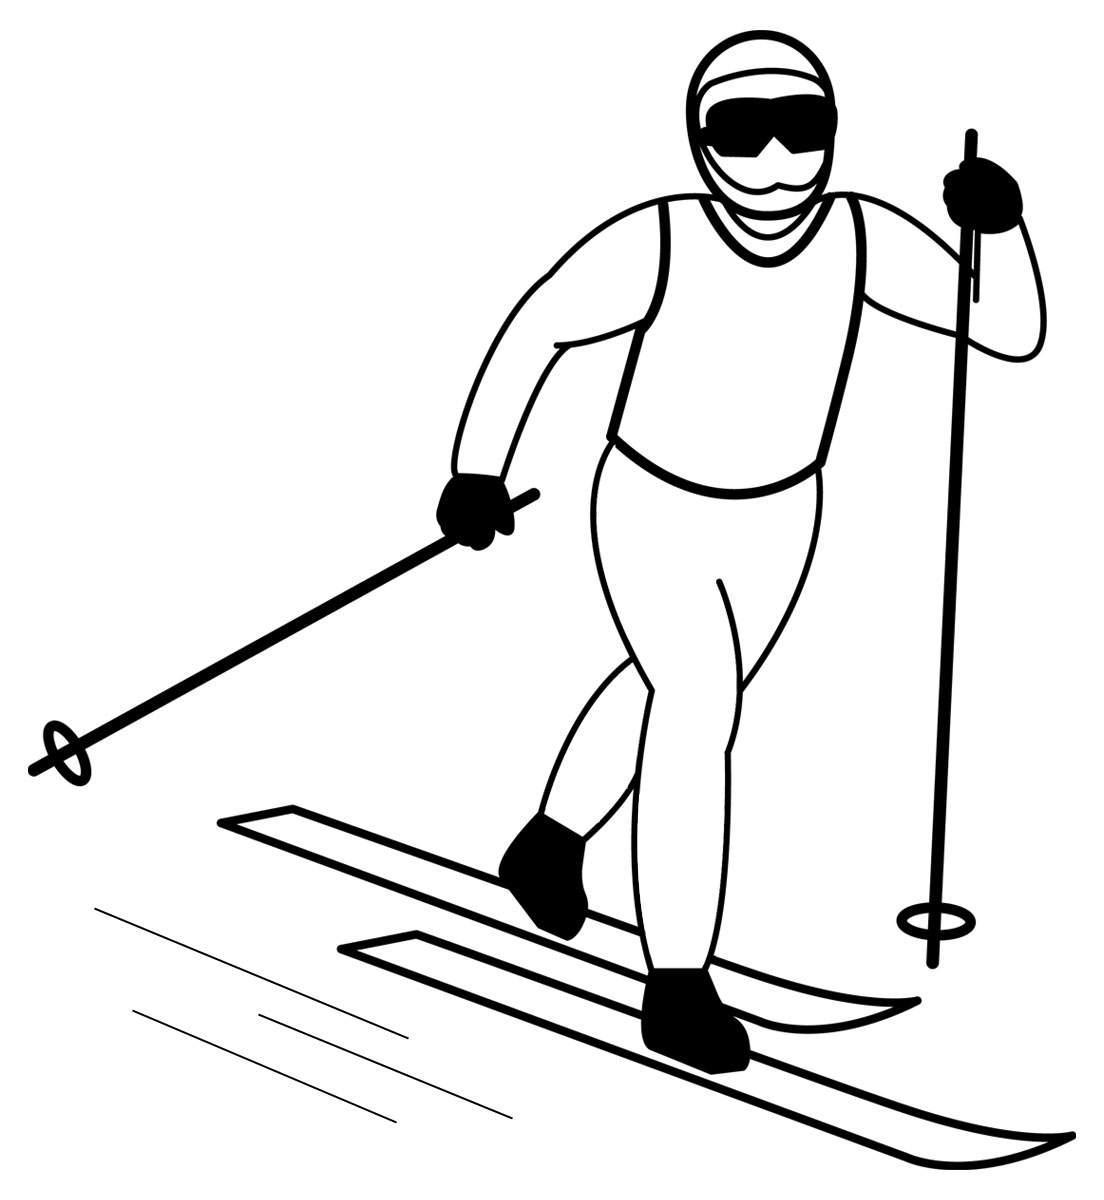 Cross Country Skiing Clip Art In Black And White  An Illustration Of A